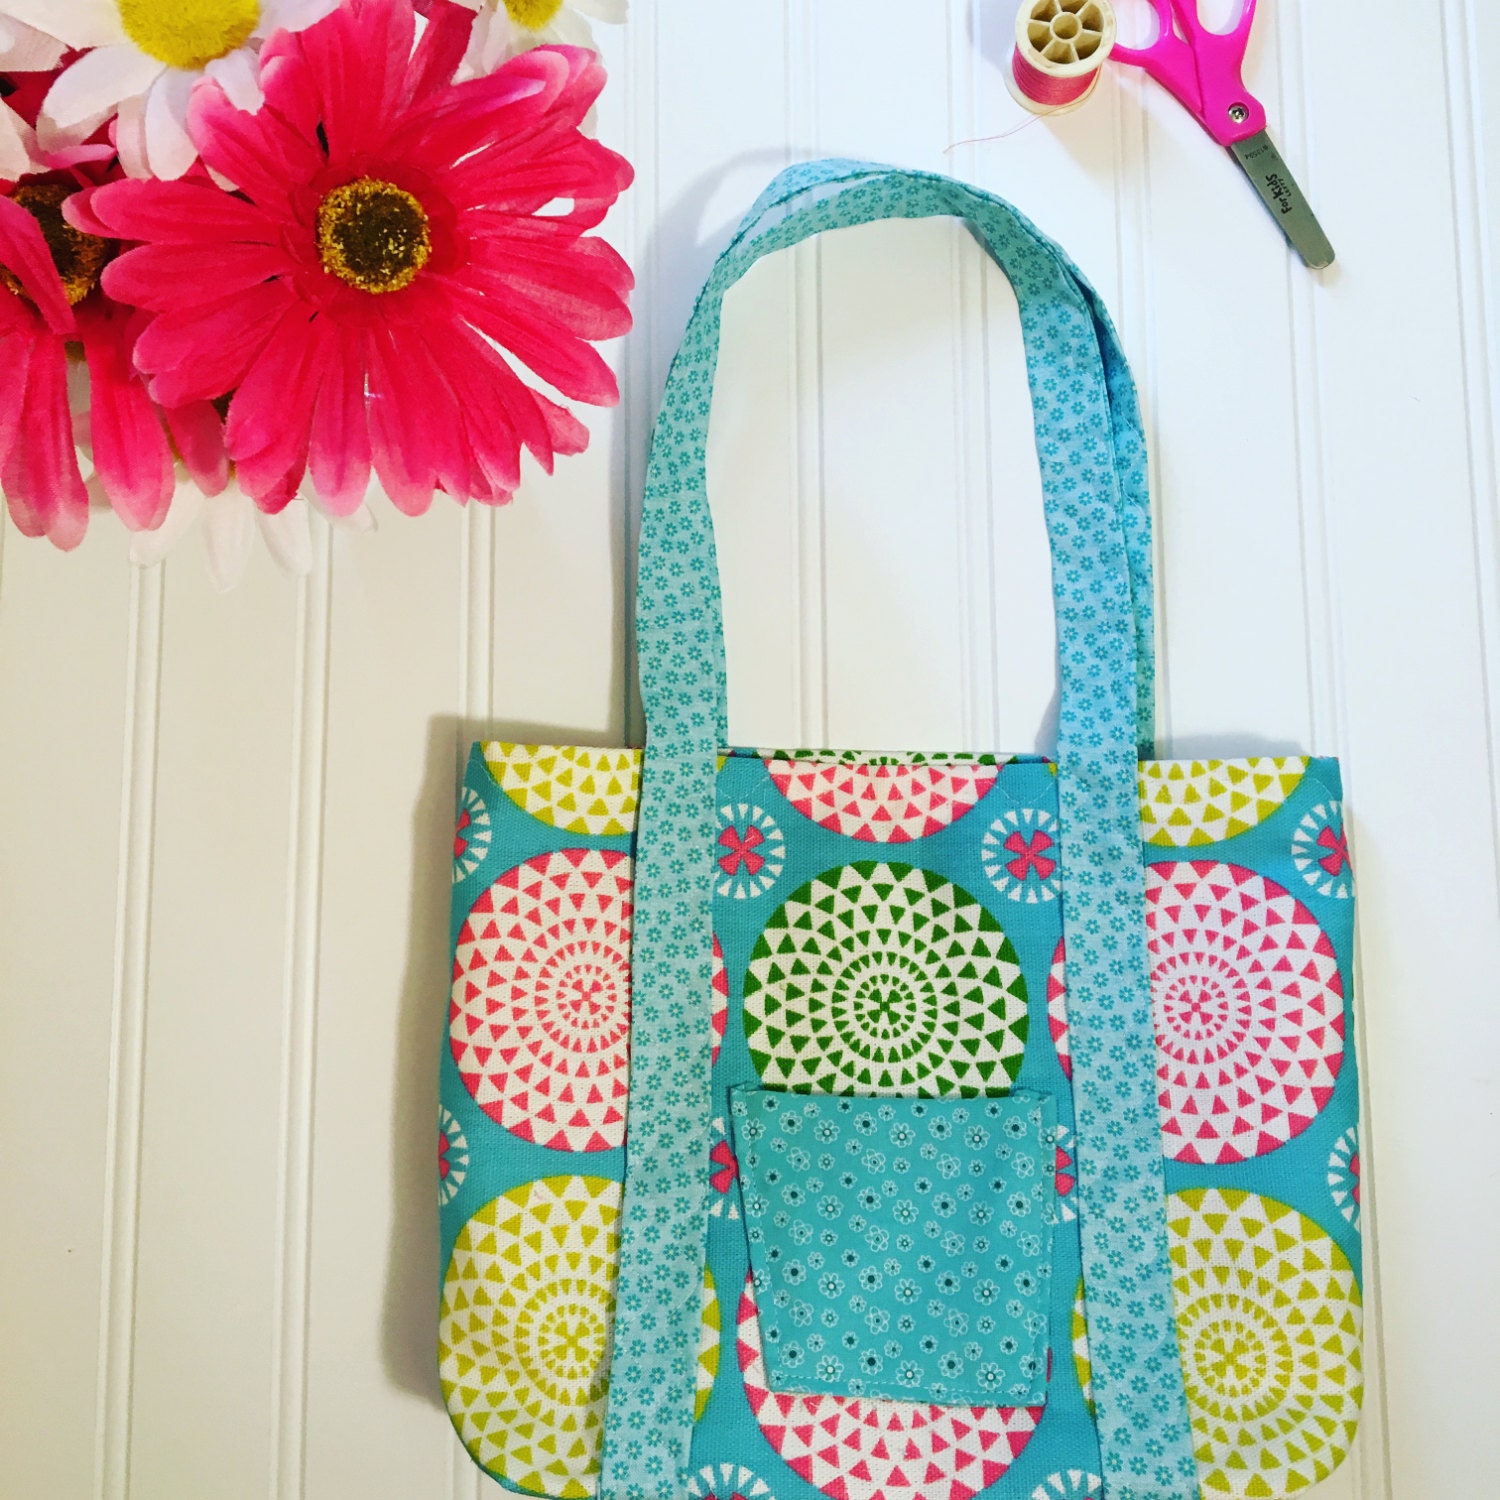 Girls baby doll diaper bag blue pink green by LillyBugBoutique15